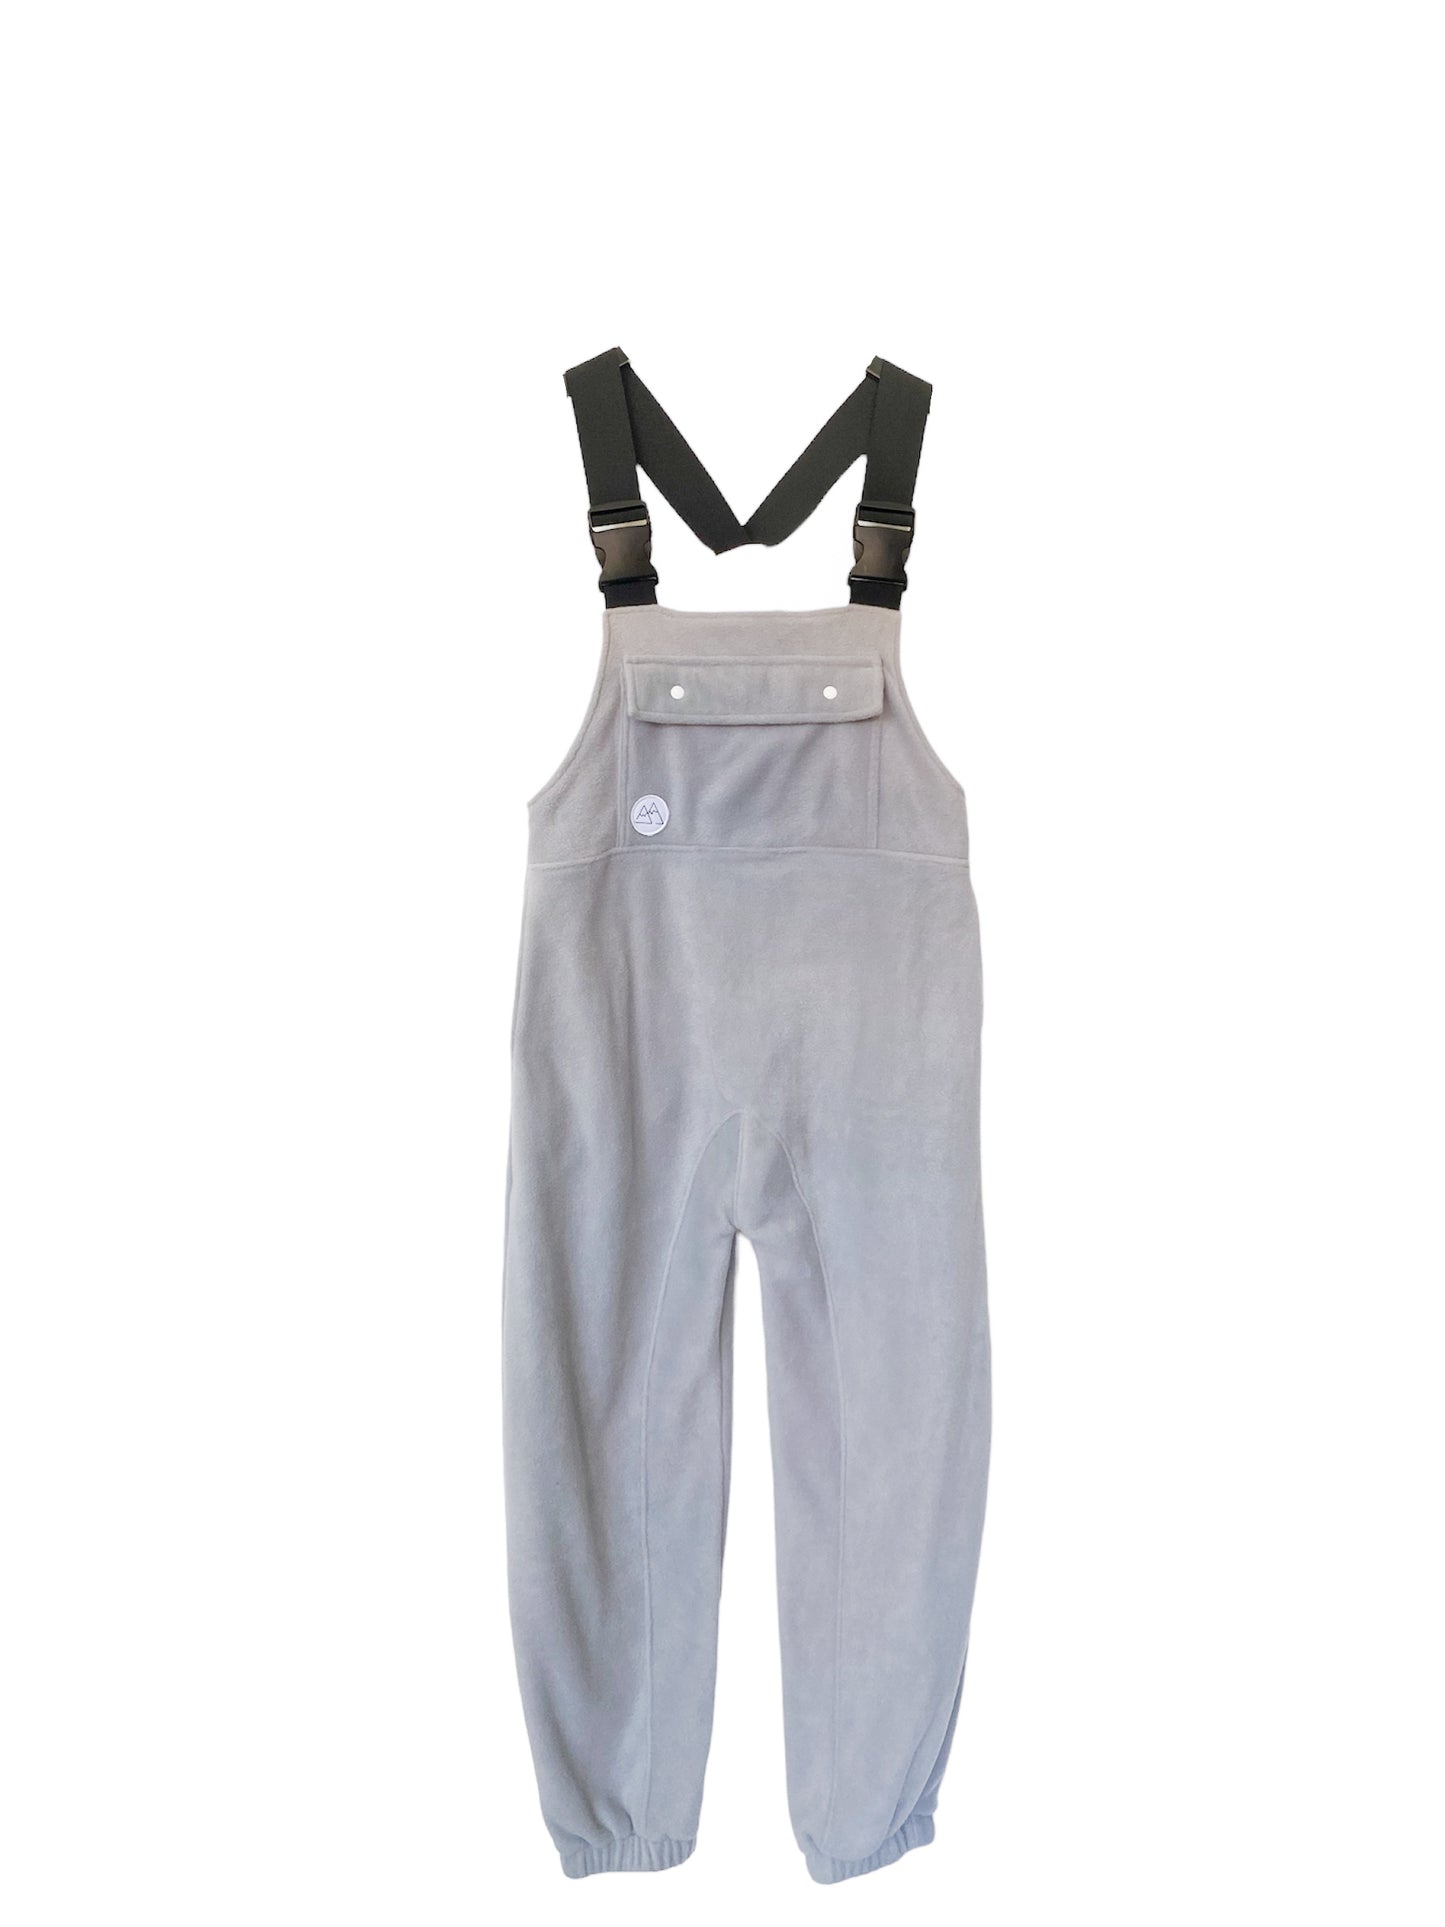 A- Overalls - Gray